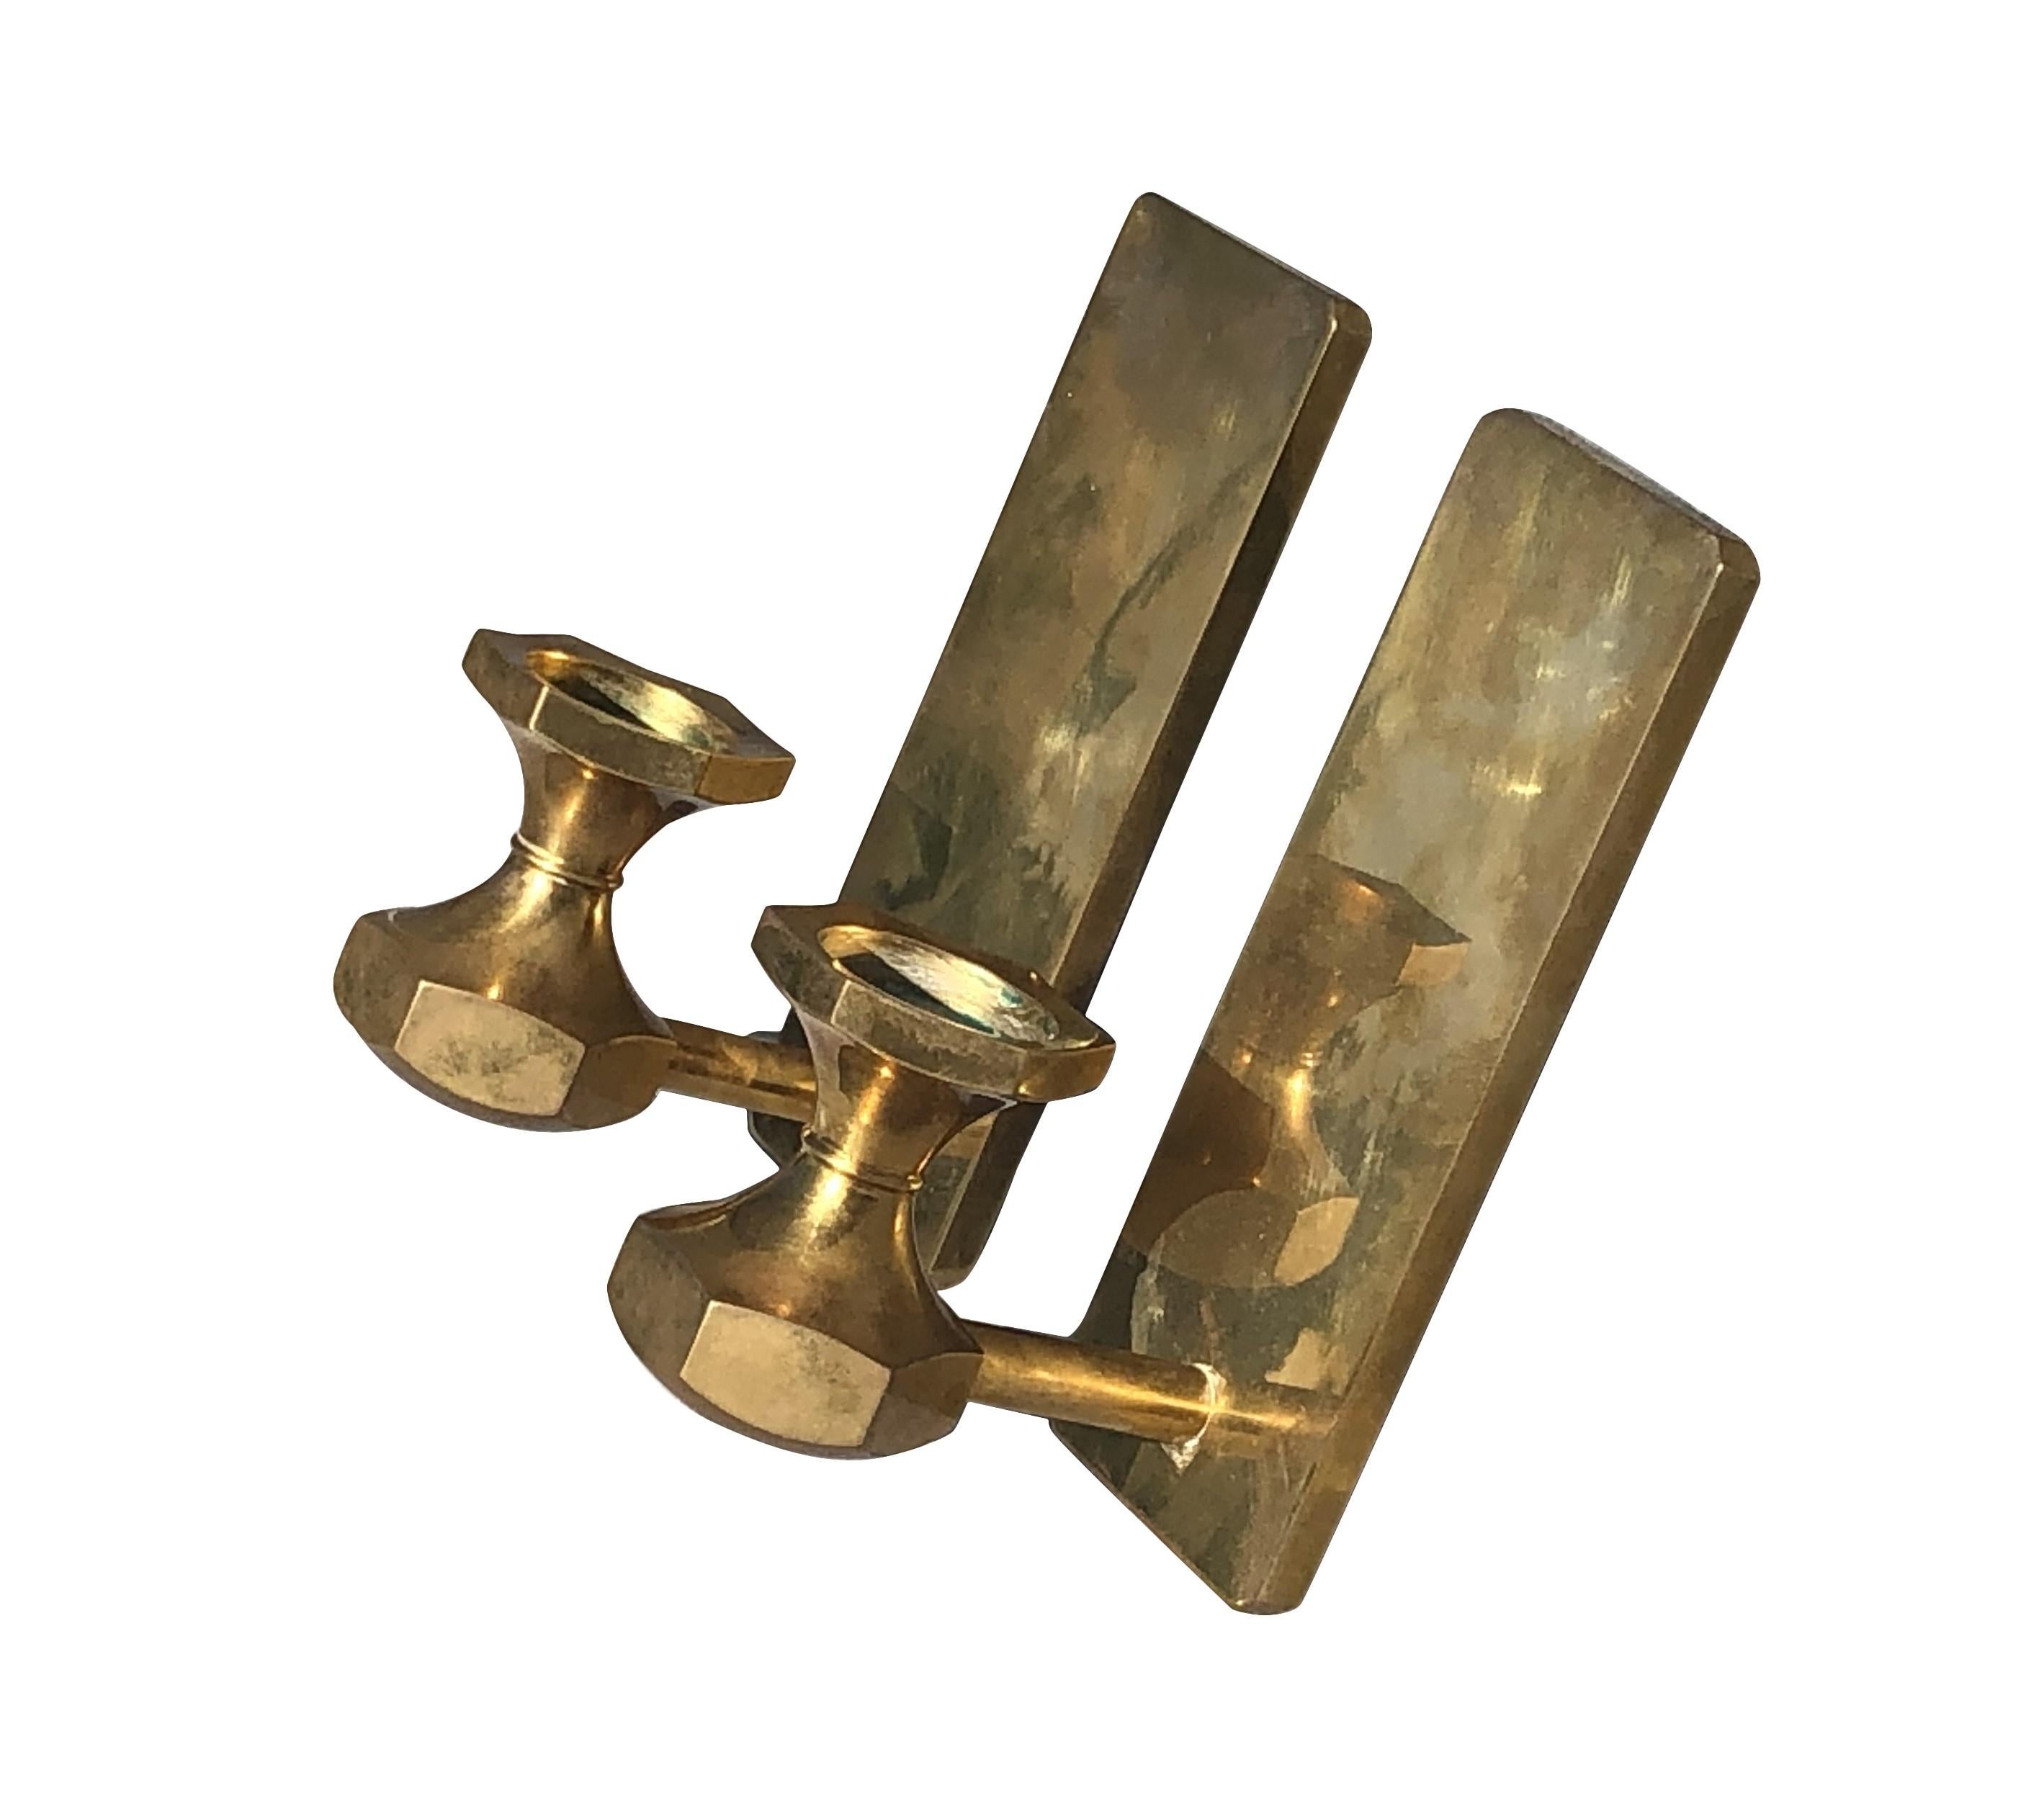 Wall mount candle wall appliques made of brass, in good condition, circa 1950, Denmark.